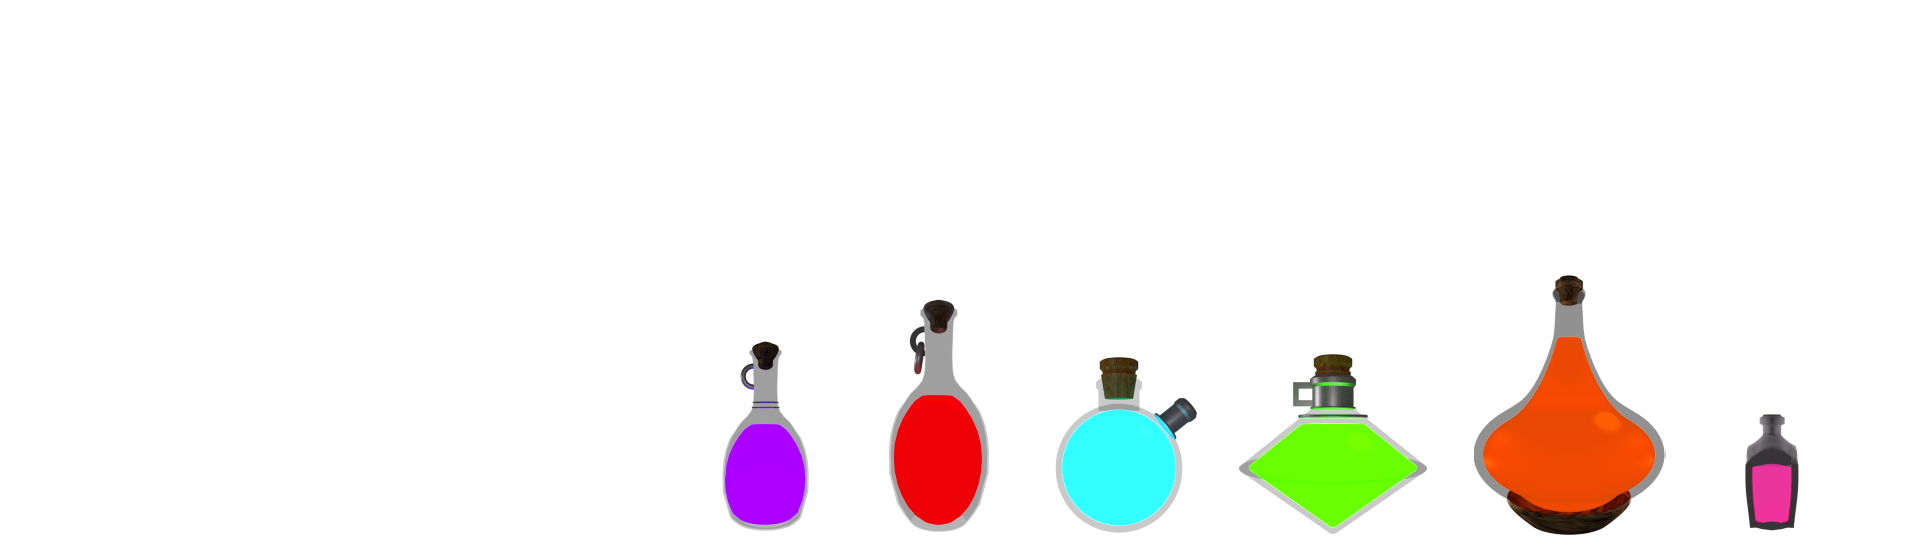 Potion Collection - Free Pack 01